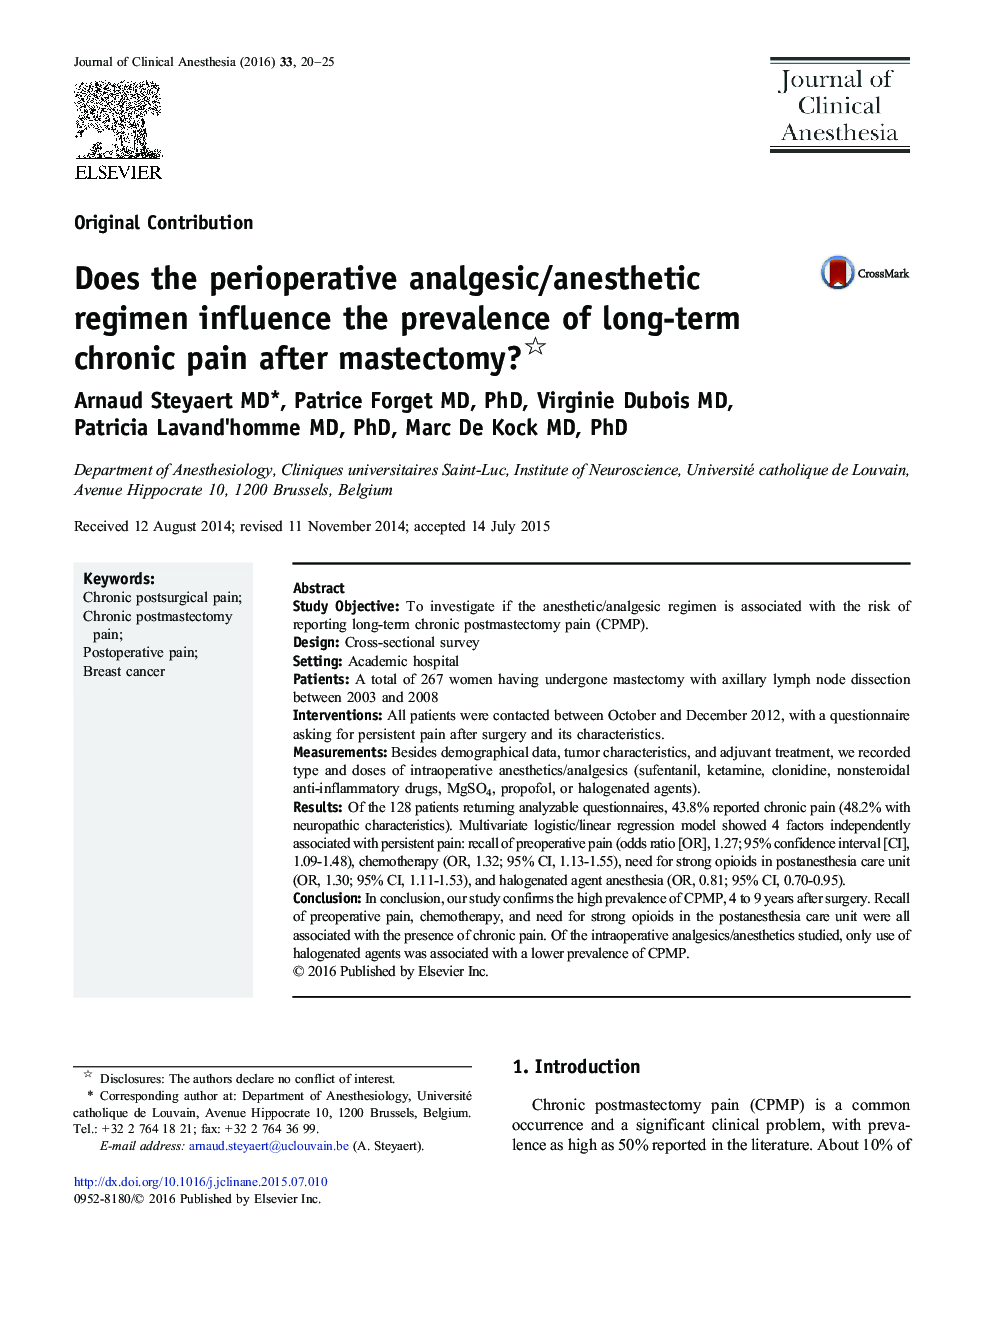 Does the perioperative analgesic/anesthetic regimen influence the prevalence of long-term chronic pain after mastectomy? 